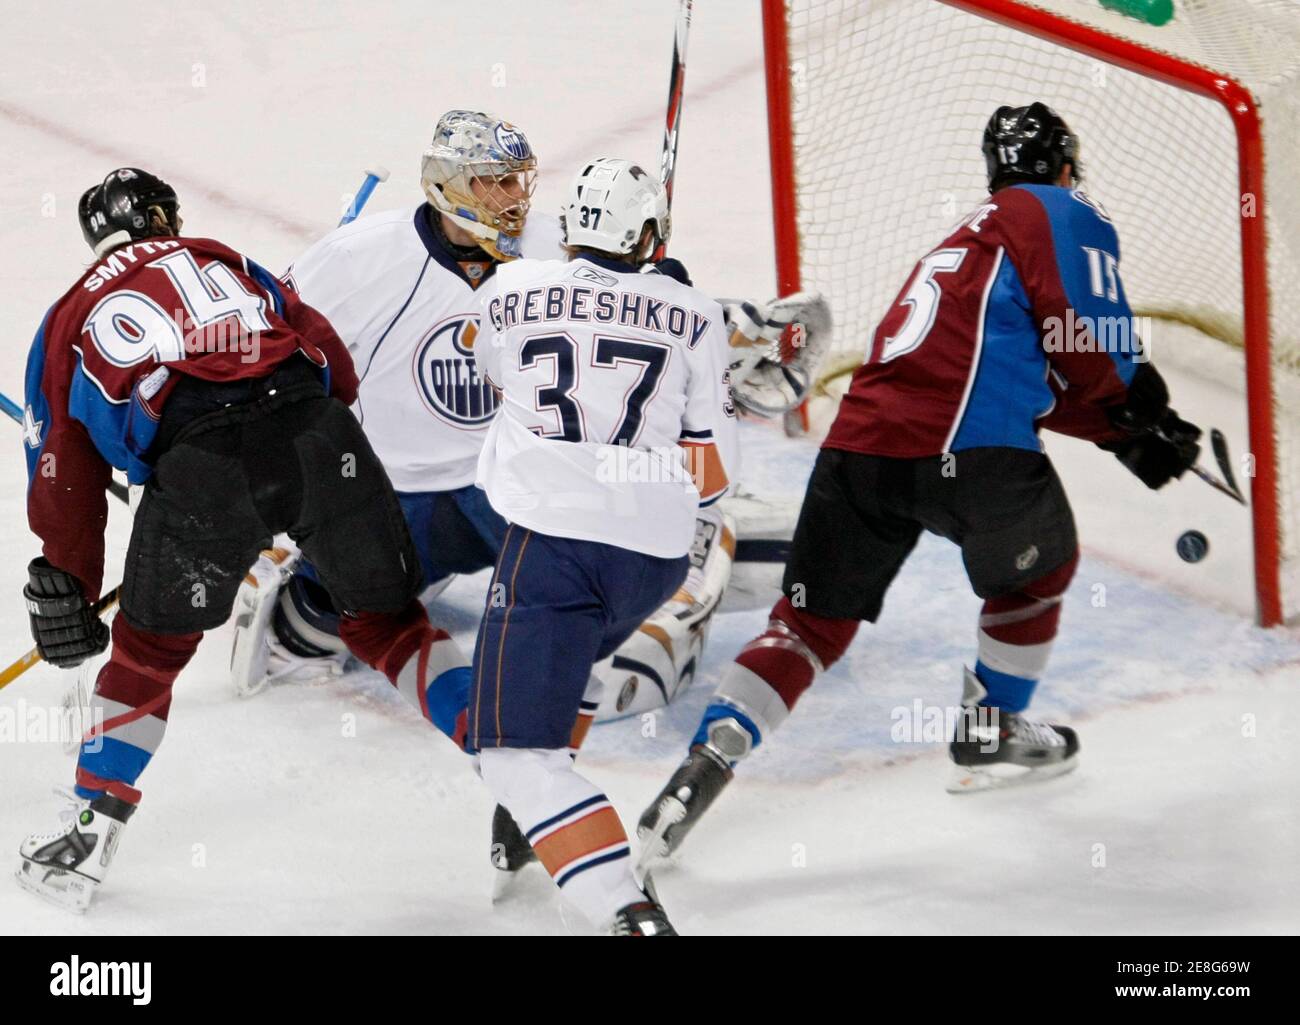 Colorado Avalanche winger Andrew Brunette (R) scores a goal over Edmonton Oilers goaltender Dwyane Roloson (2nd L) in the first period of the NHL hockey game in Denver, Colorado March 28, 2008. Also on the play are Colorado's Ryan Smyth (94) and Edmonton's Denis Grebeshkov (37).   REUTERS/Rick Wilking (UNITED STATES) Stock Photo